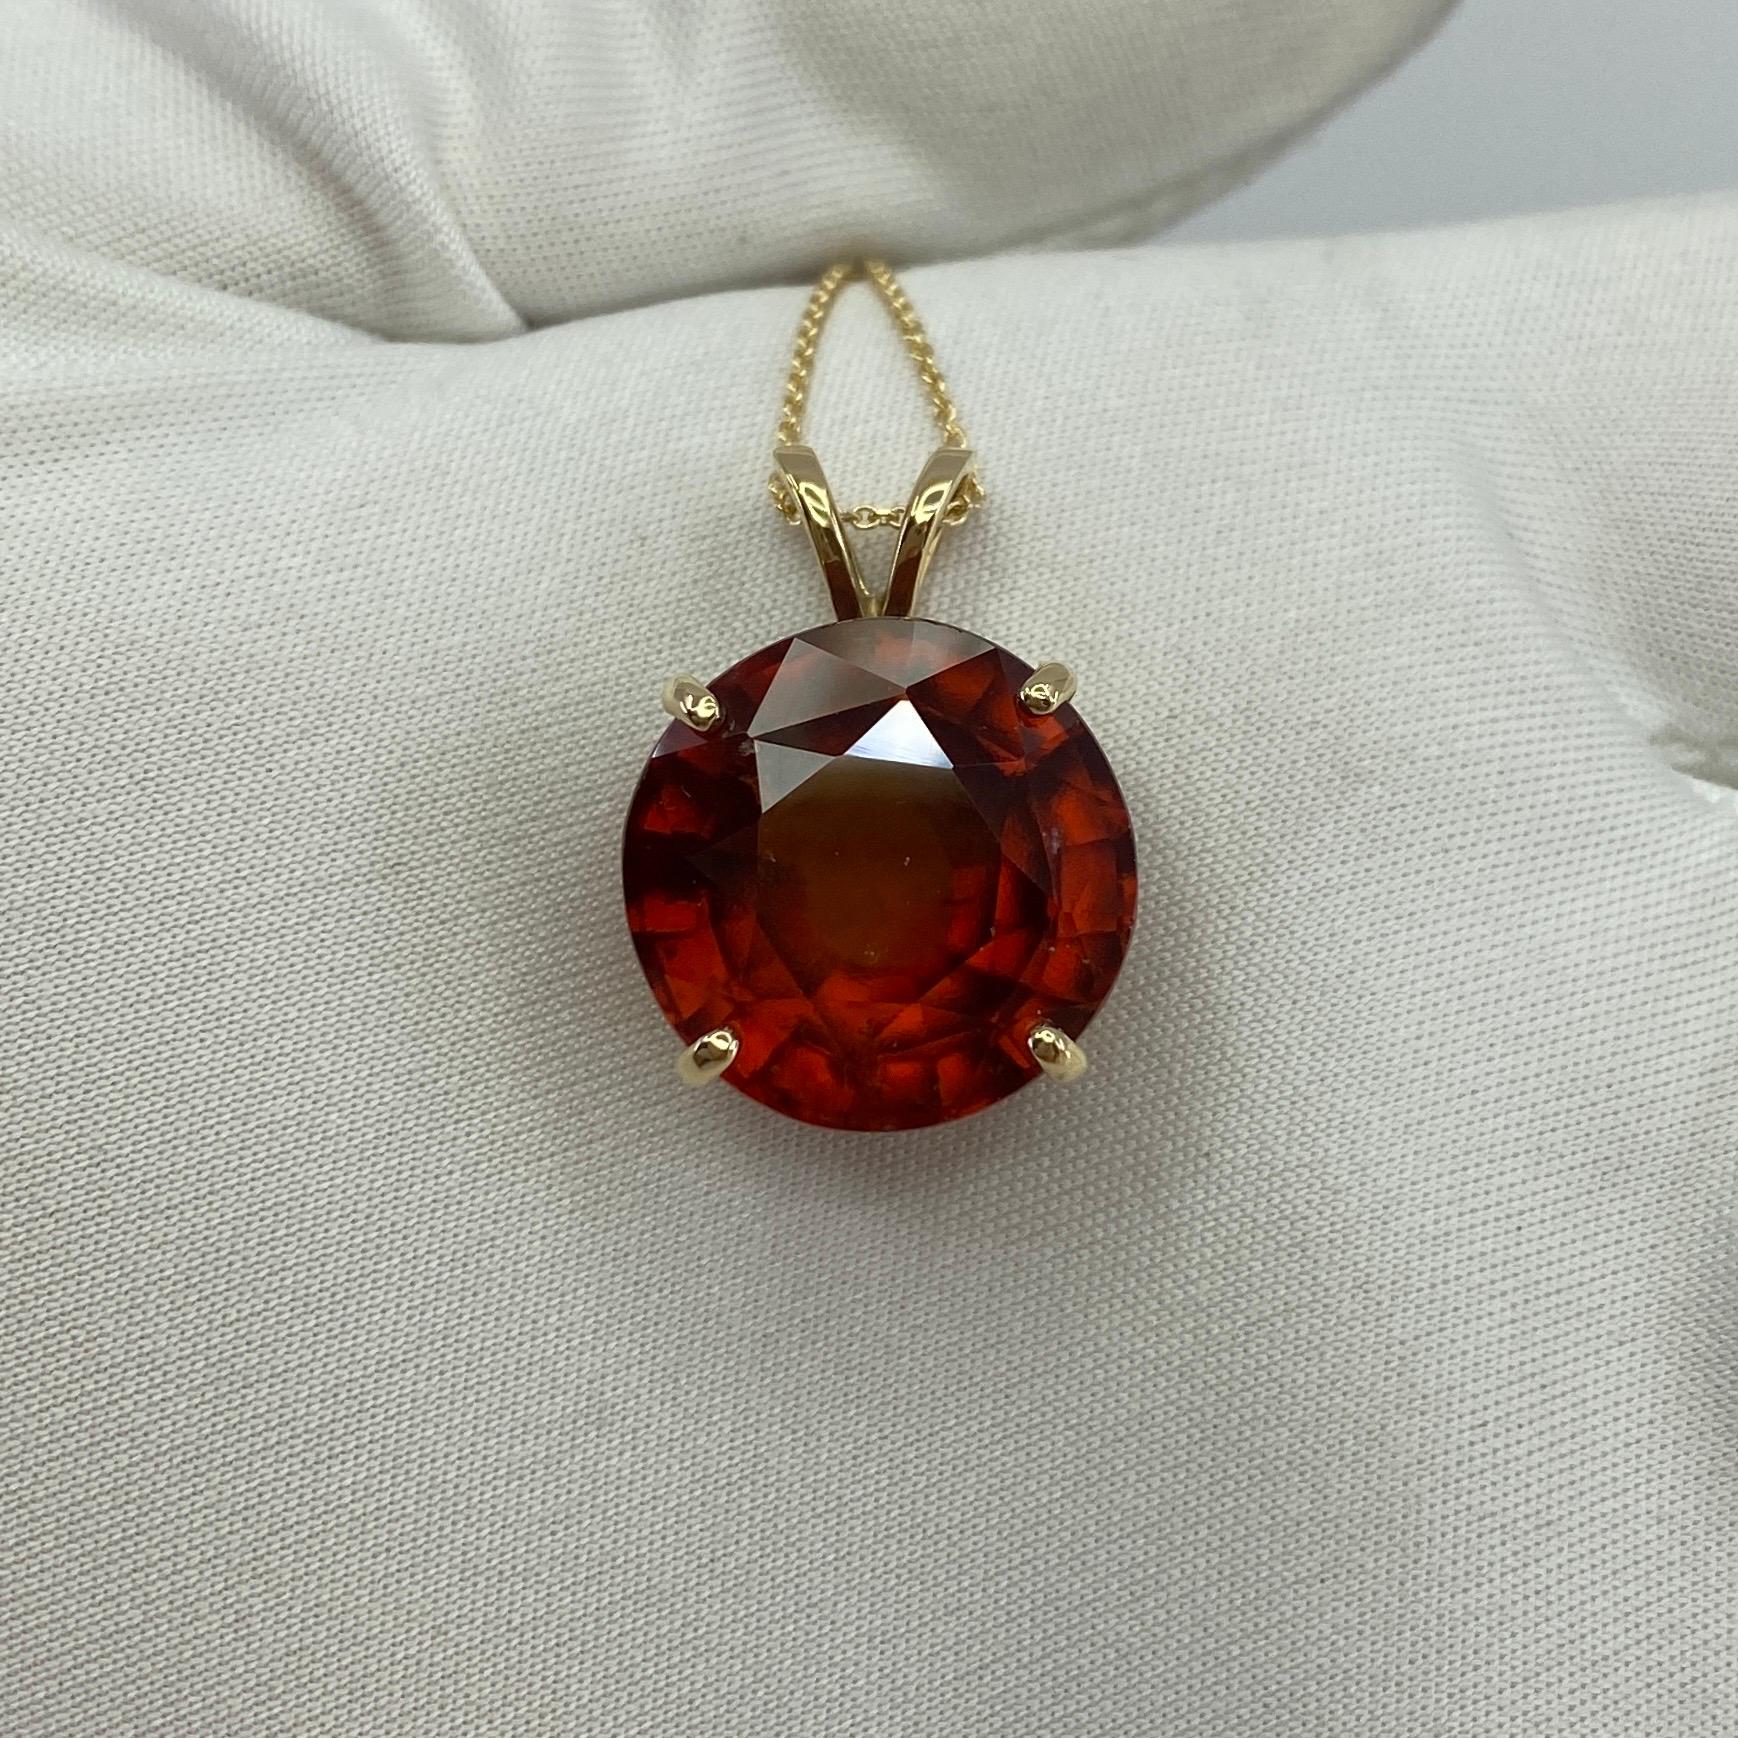 Fine Vivid Orange Hessonite Garnet Solitaire Pendant.

Huge 16.26 carat hessonite garnet with a stunning vivid orange colour set in a fine 14k yellow gold solitaire pendant. This gem has a stunning colour and very good clarity. Some small natural